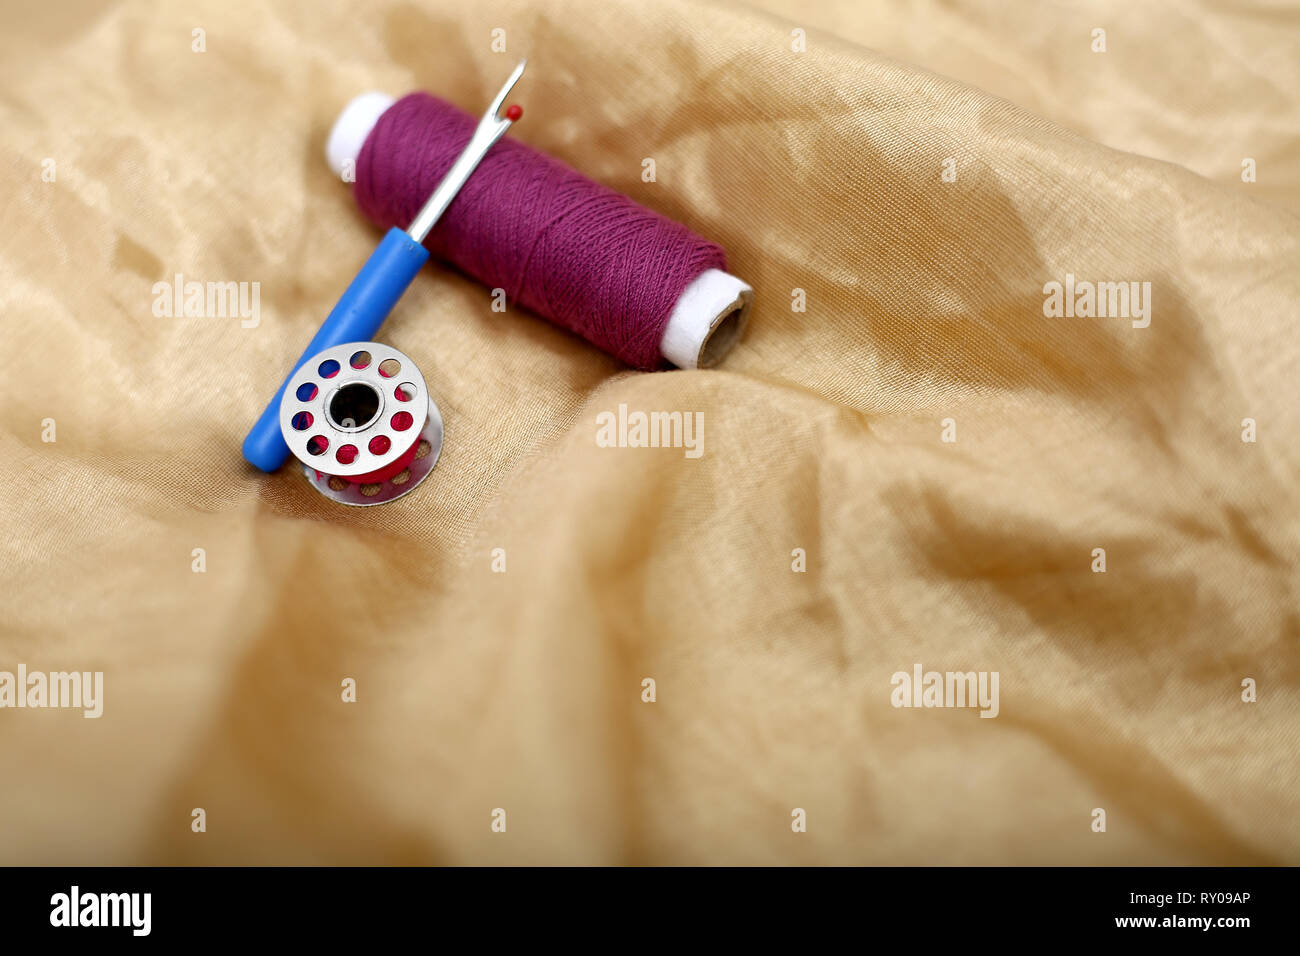 Picture of one sewing thread, needle ripper and bobbin on the